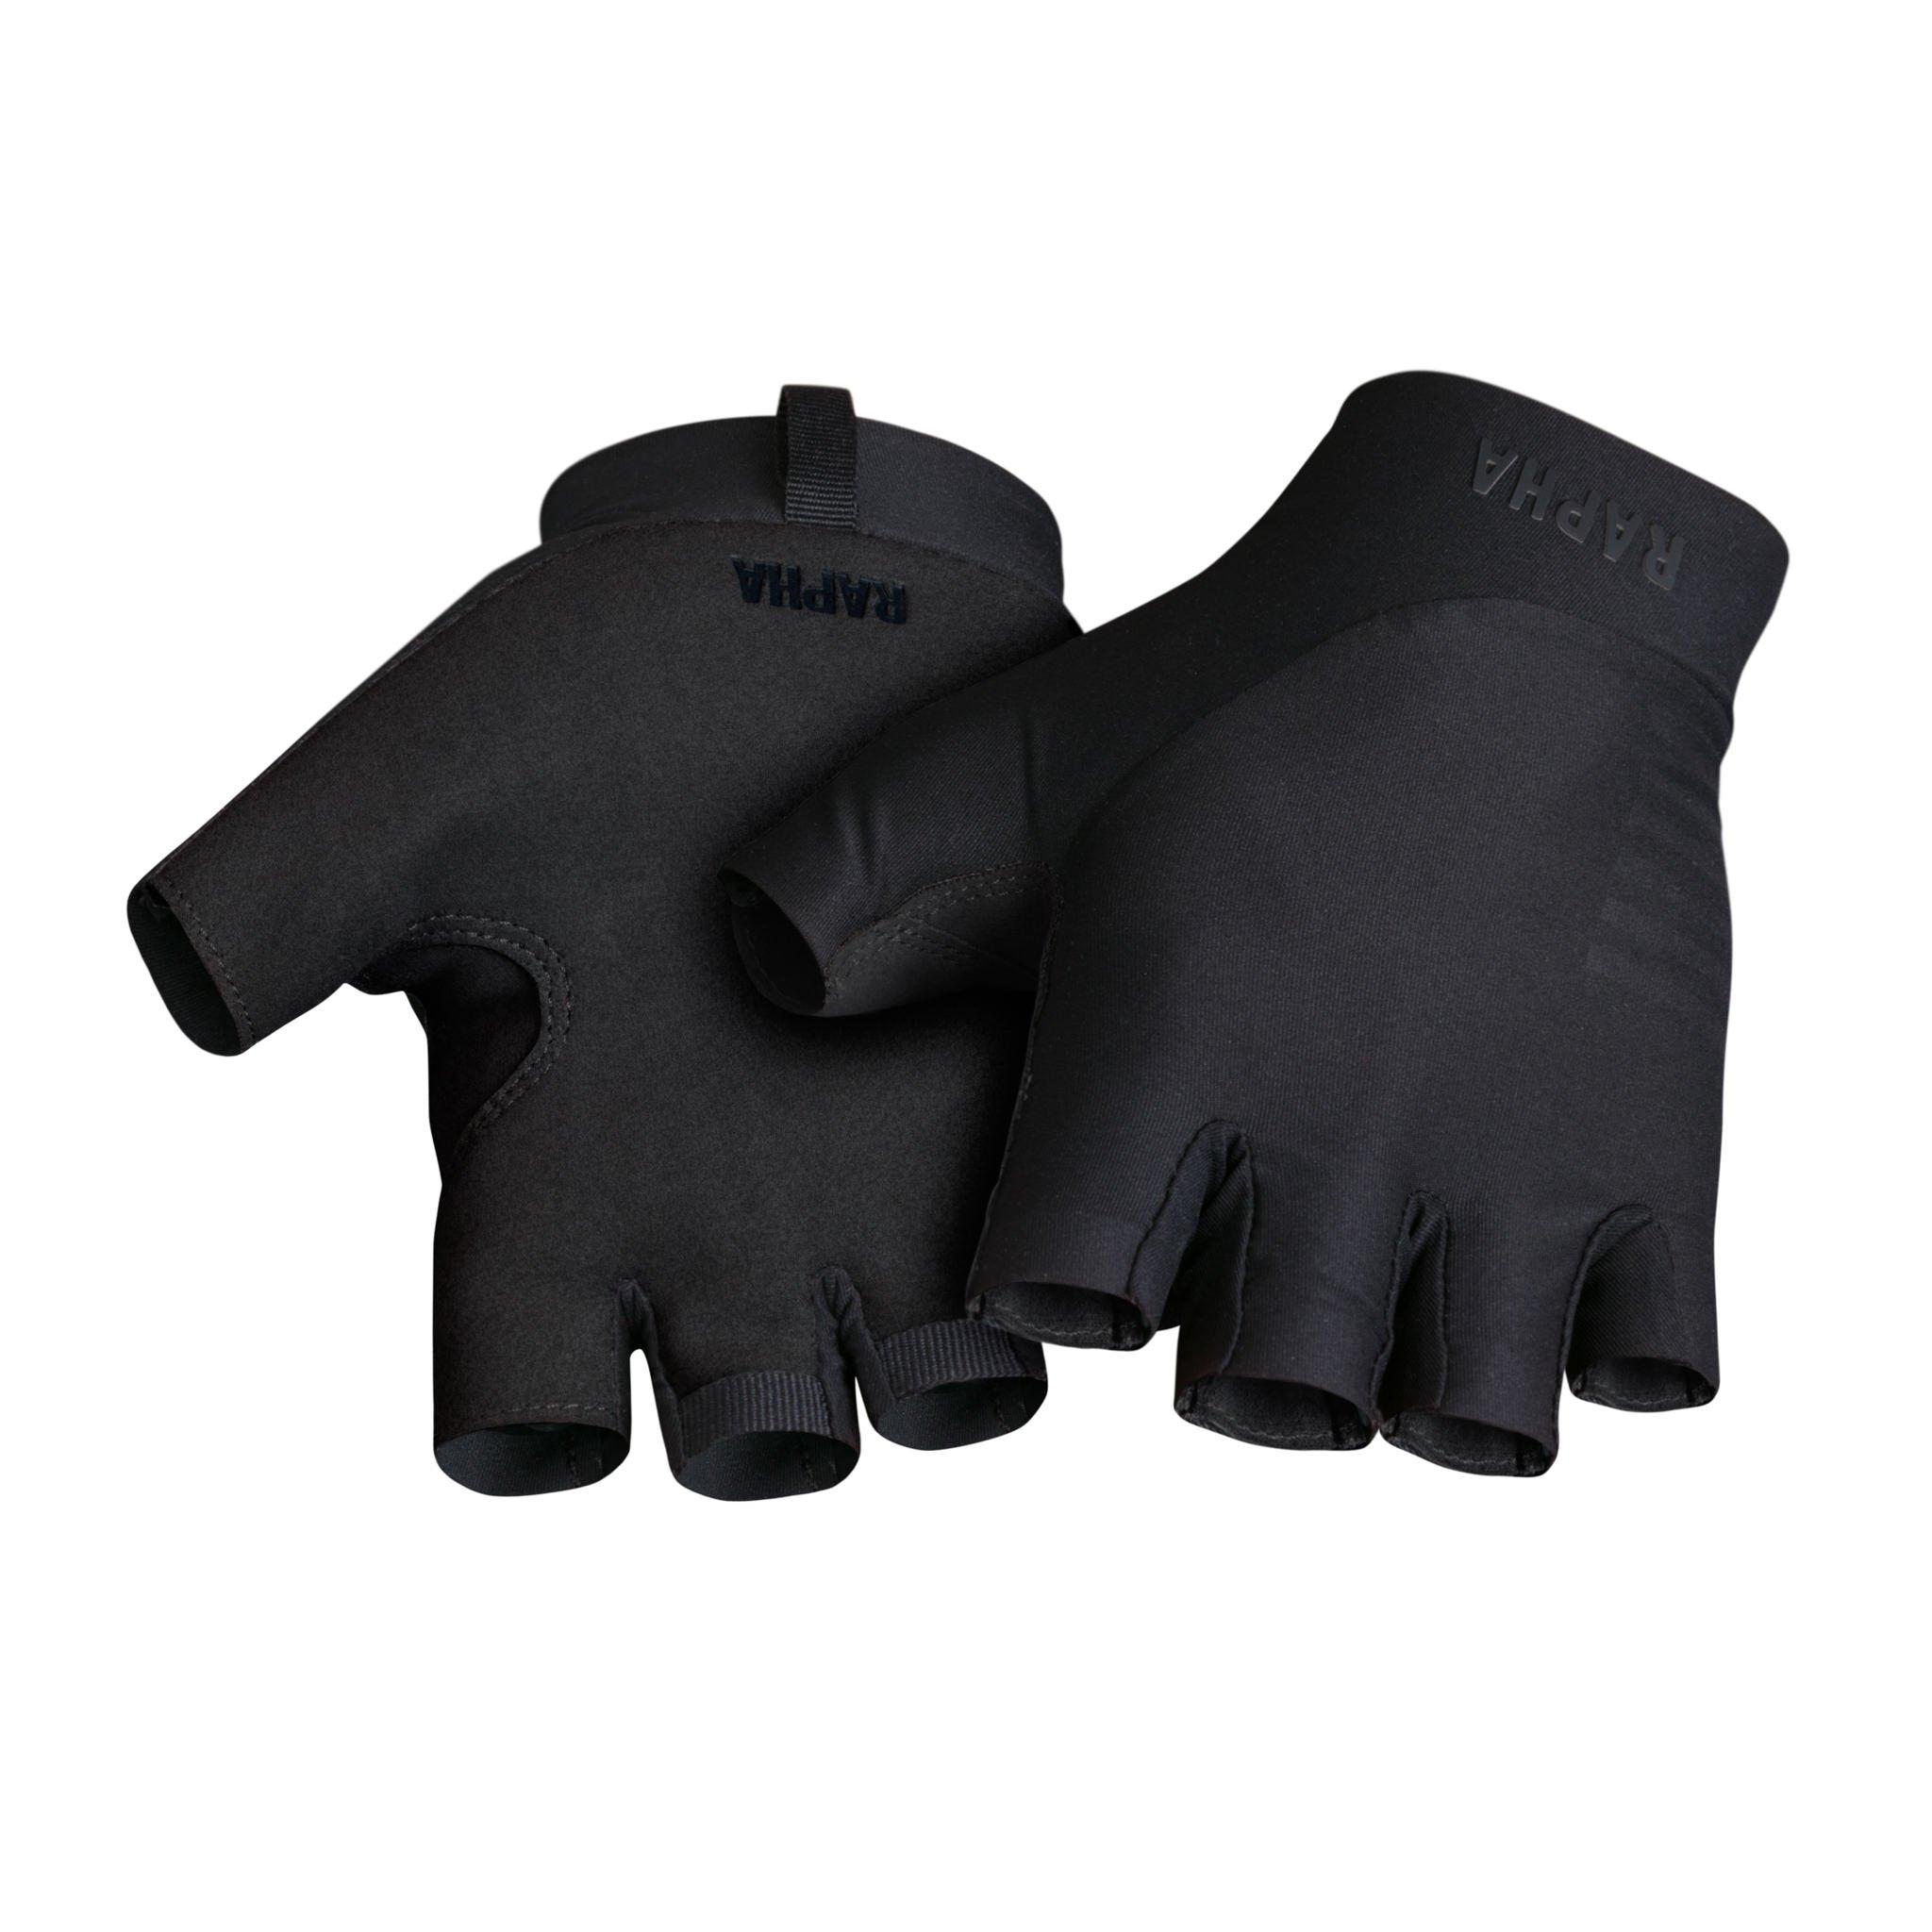 protein variabel Få kontrol Men's Pro Team Mitts | Men's Pro Team Cycling Mitts For Hot Weather Riding  | Rapha